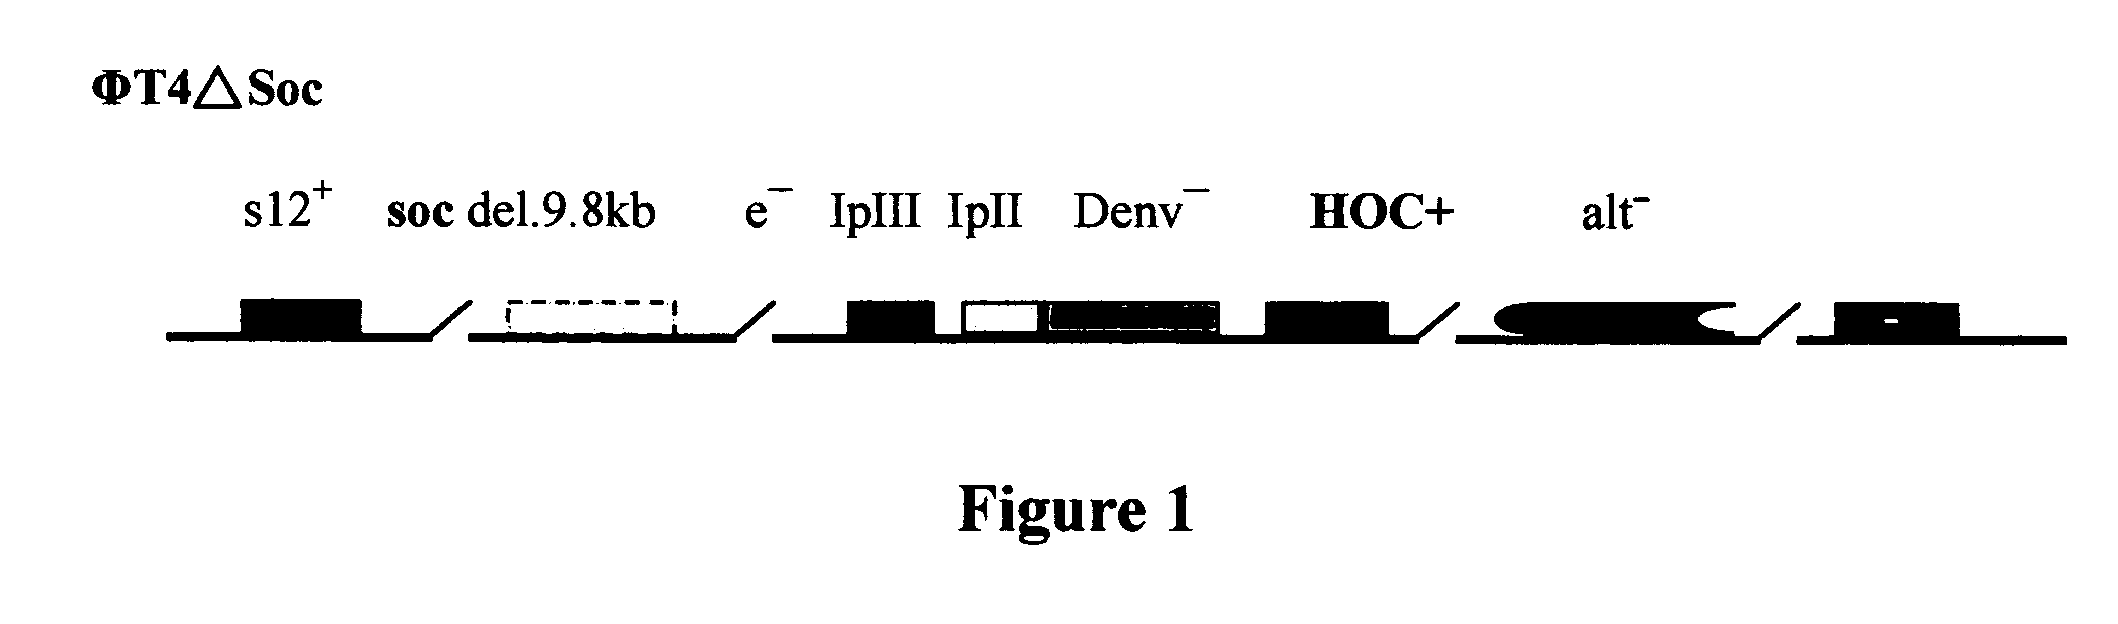 Novel recombinant T4 phage particle and uses thereof